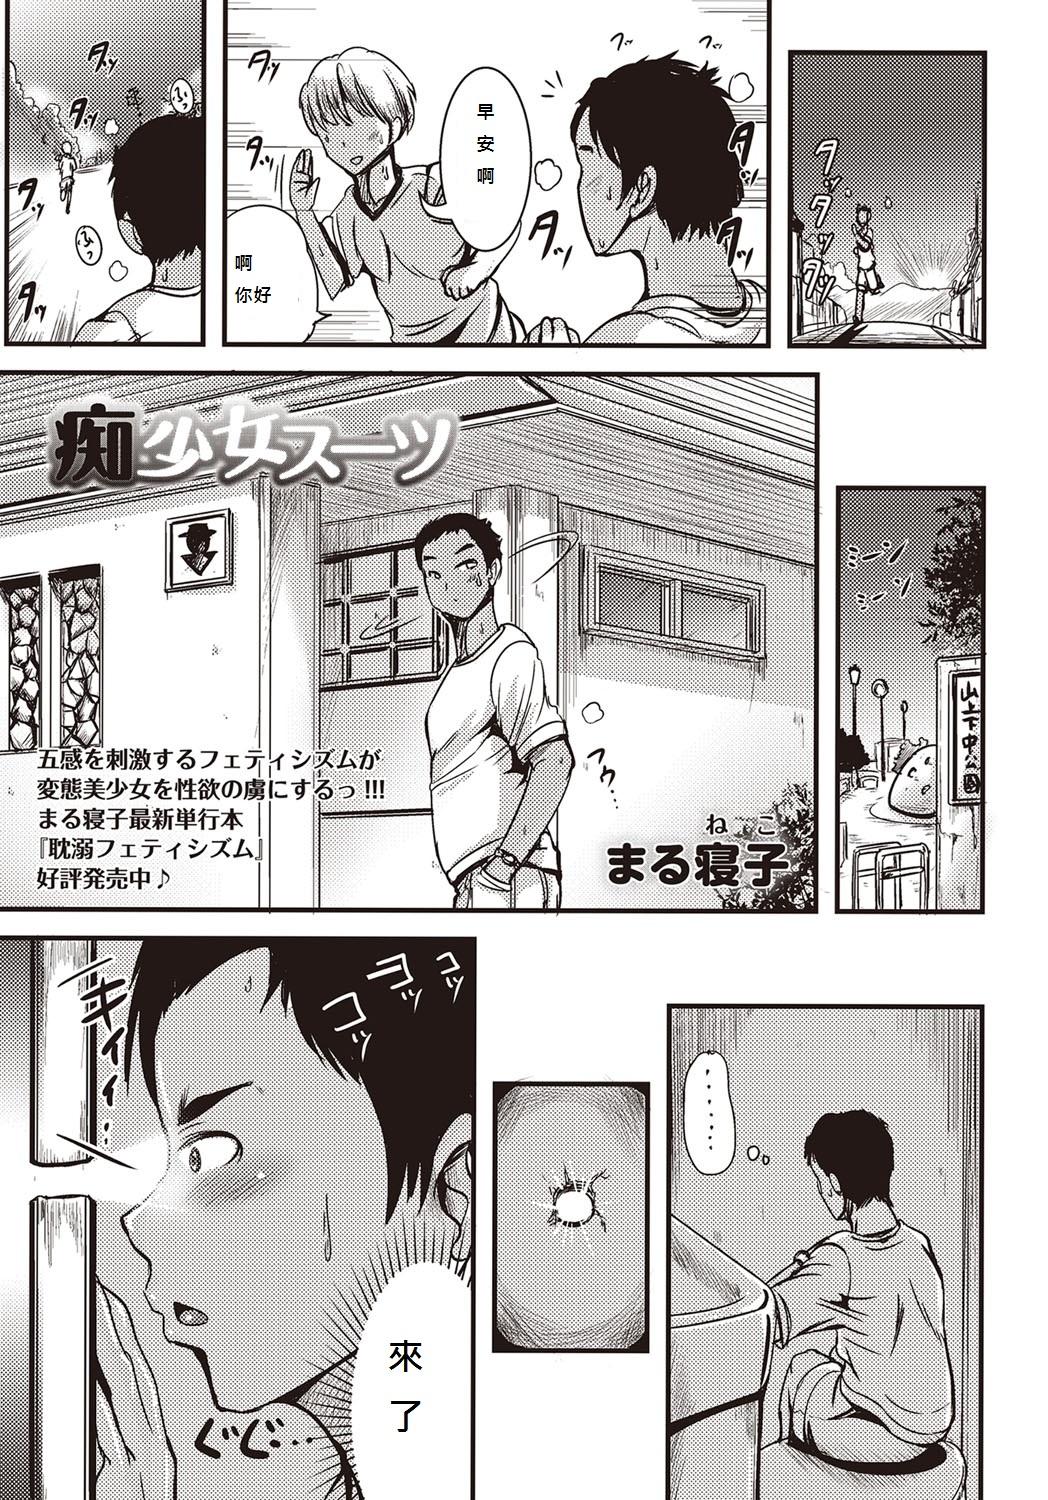 Gays Chishoujo Suit Relax - Page 1